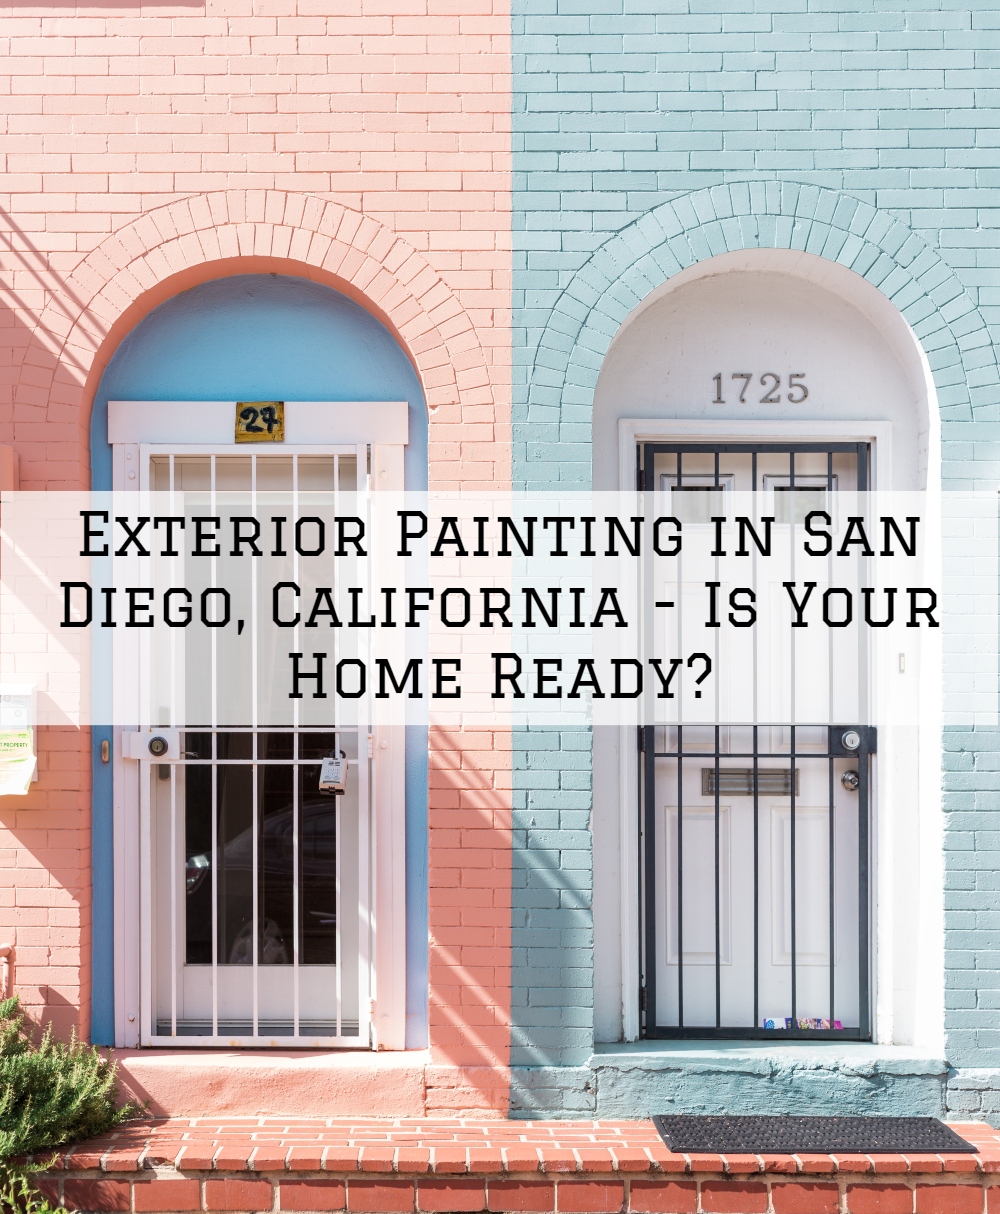 Exterior Painting in San Diego, California - Is Your Home Ready_.jpg